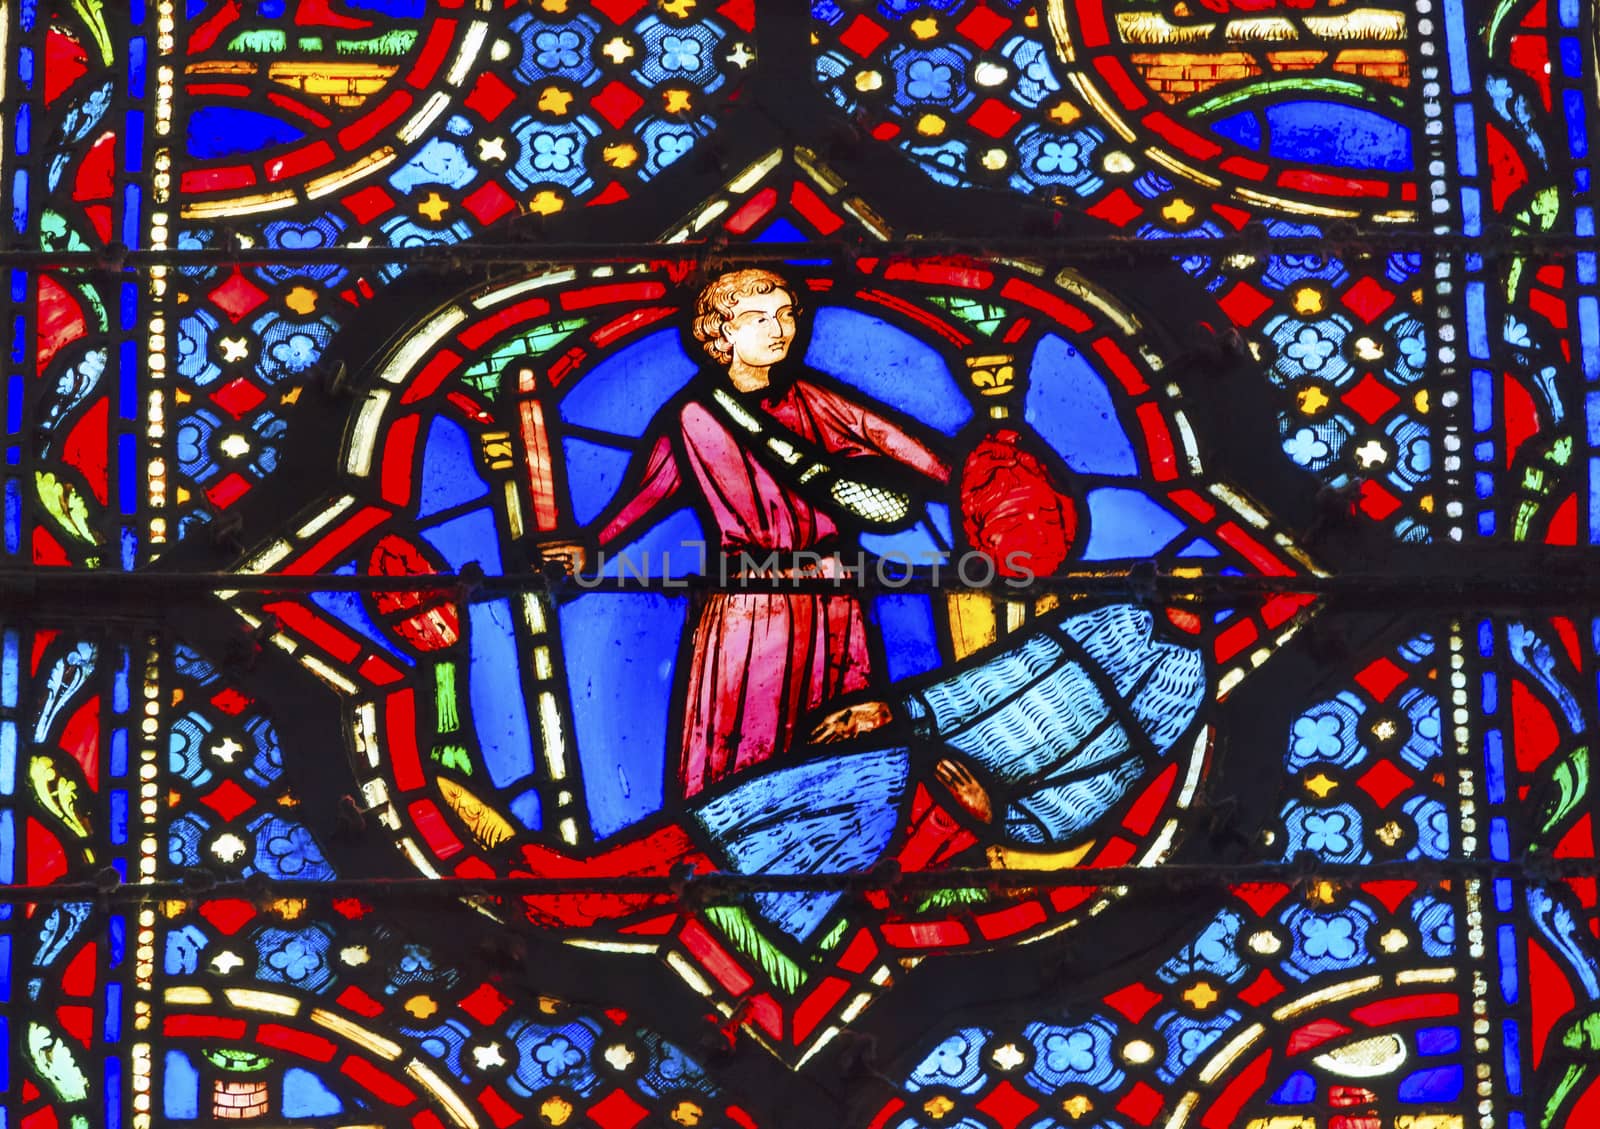 Knights Beheading Medieval Life Stained Glass Saint Chapelle Paris France.  Saint King Louis 9th created Sainte Chapelle in 1248 to house Christian relics, including Christ's Crown of Thorns.  Stained Glass created in the 13th Century and shows various biblical stories along with stories from 1200s.